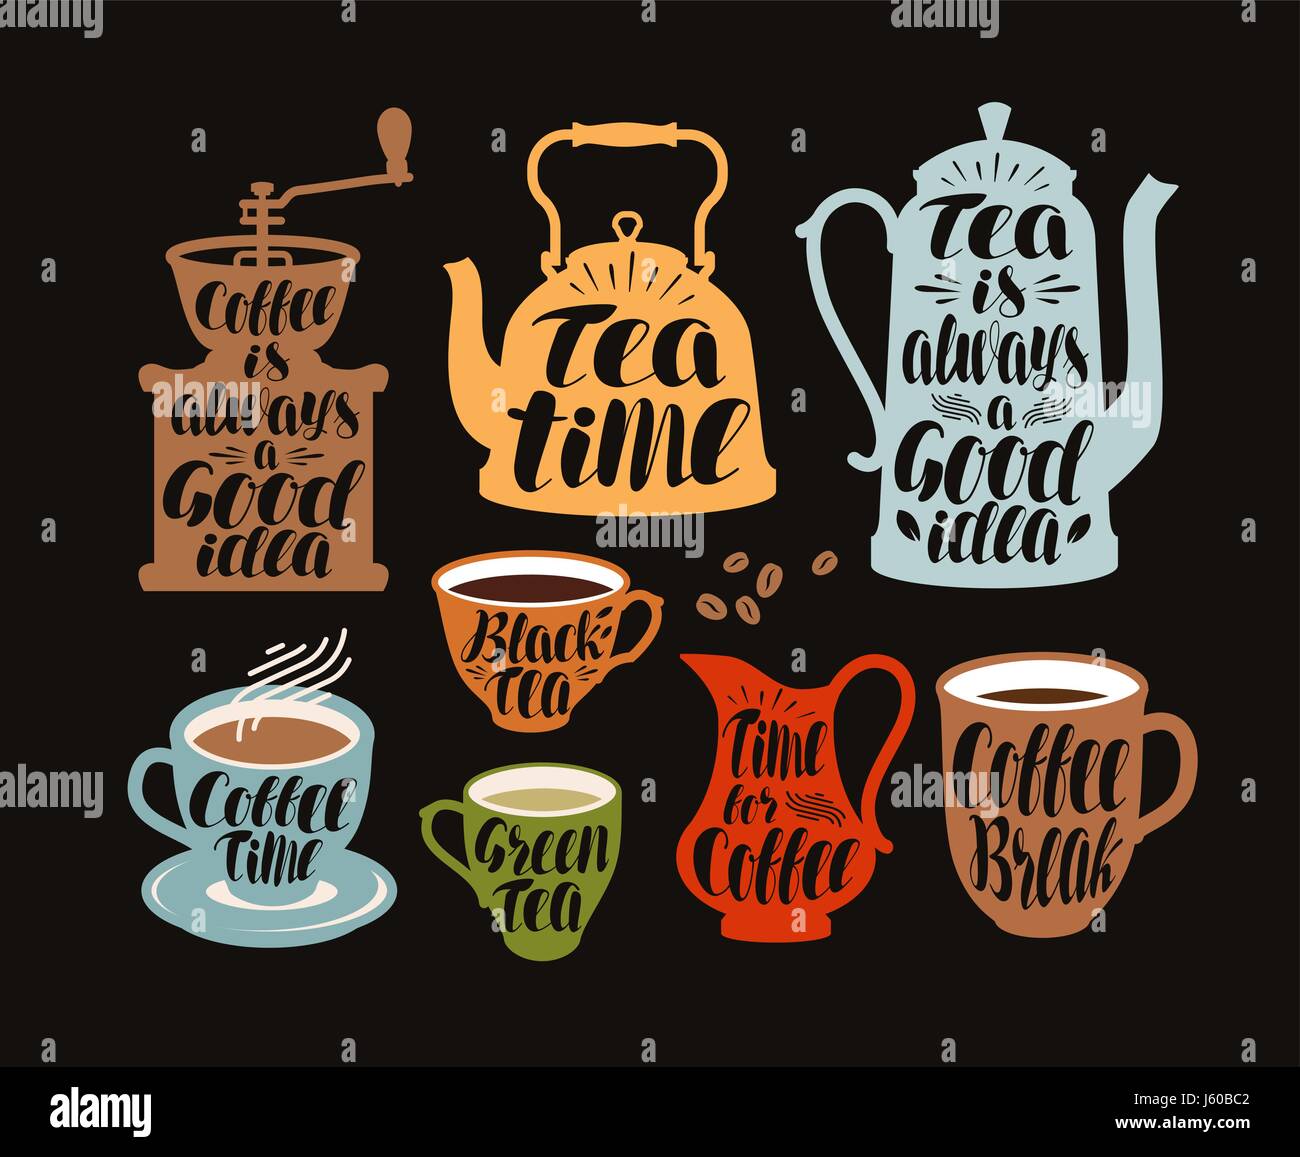 Hot drinks, tea, coffee label set. Collection decorative elements for menu restaurant or cafe. Lettering, calligraphy vector illustration Stock Vector